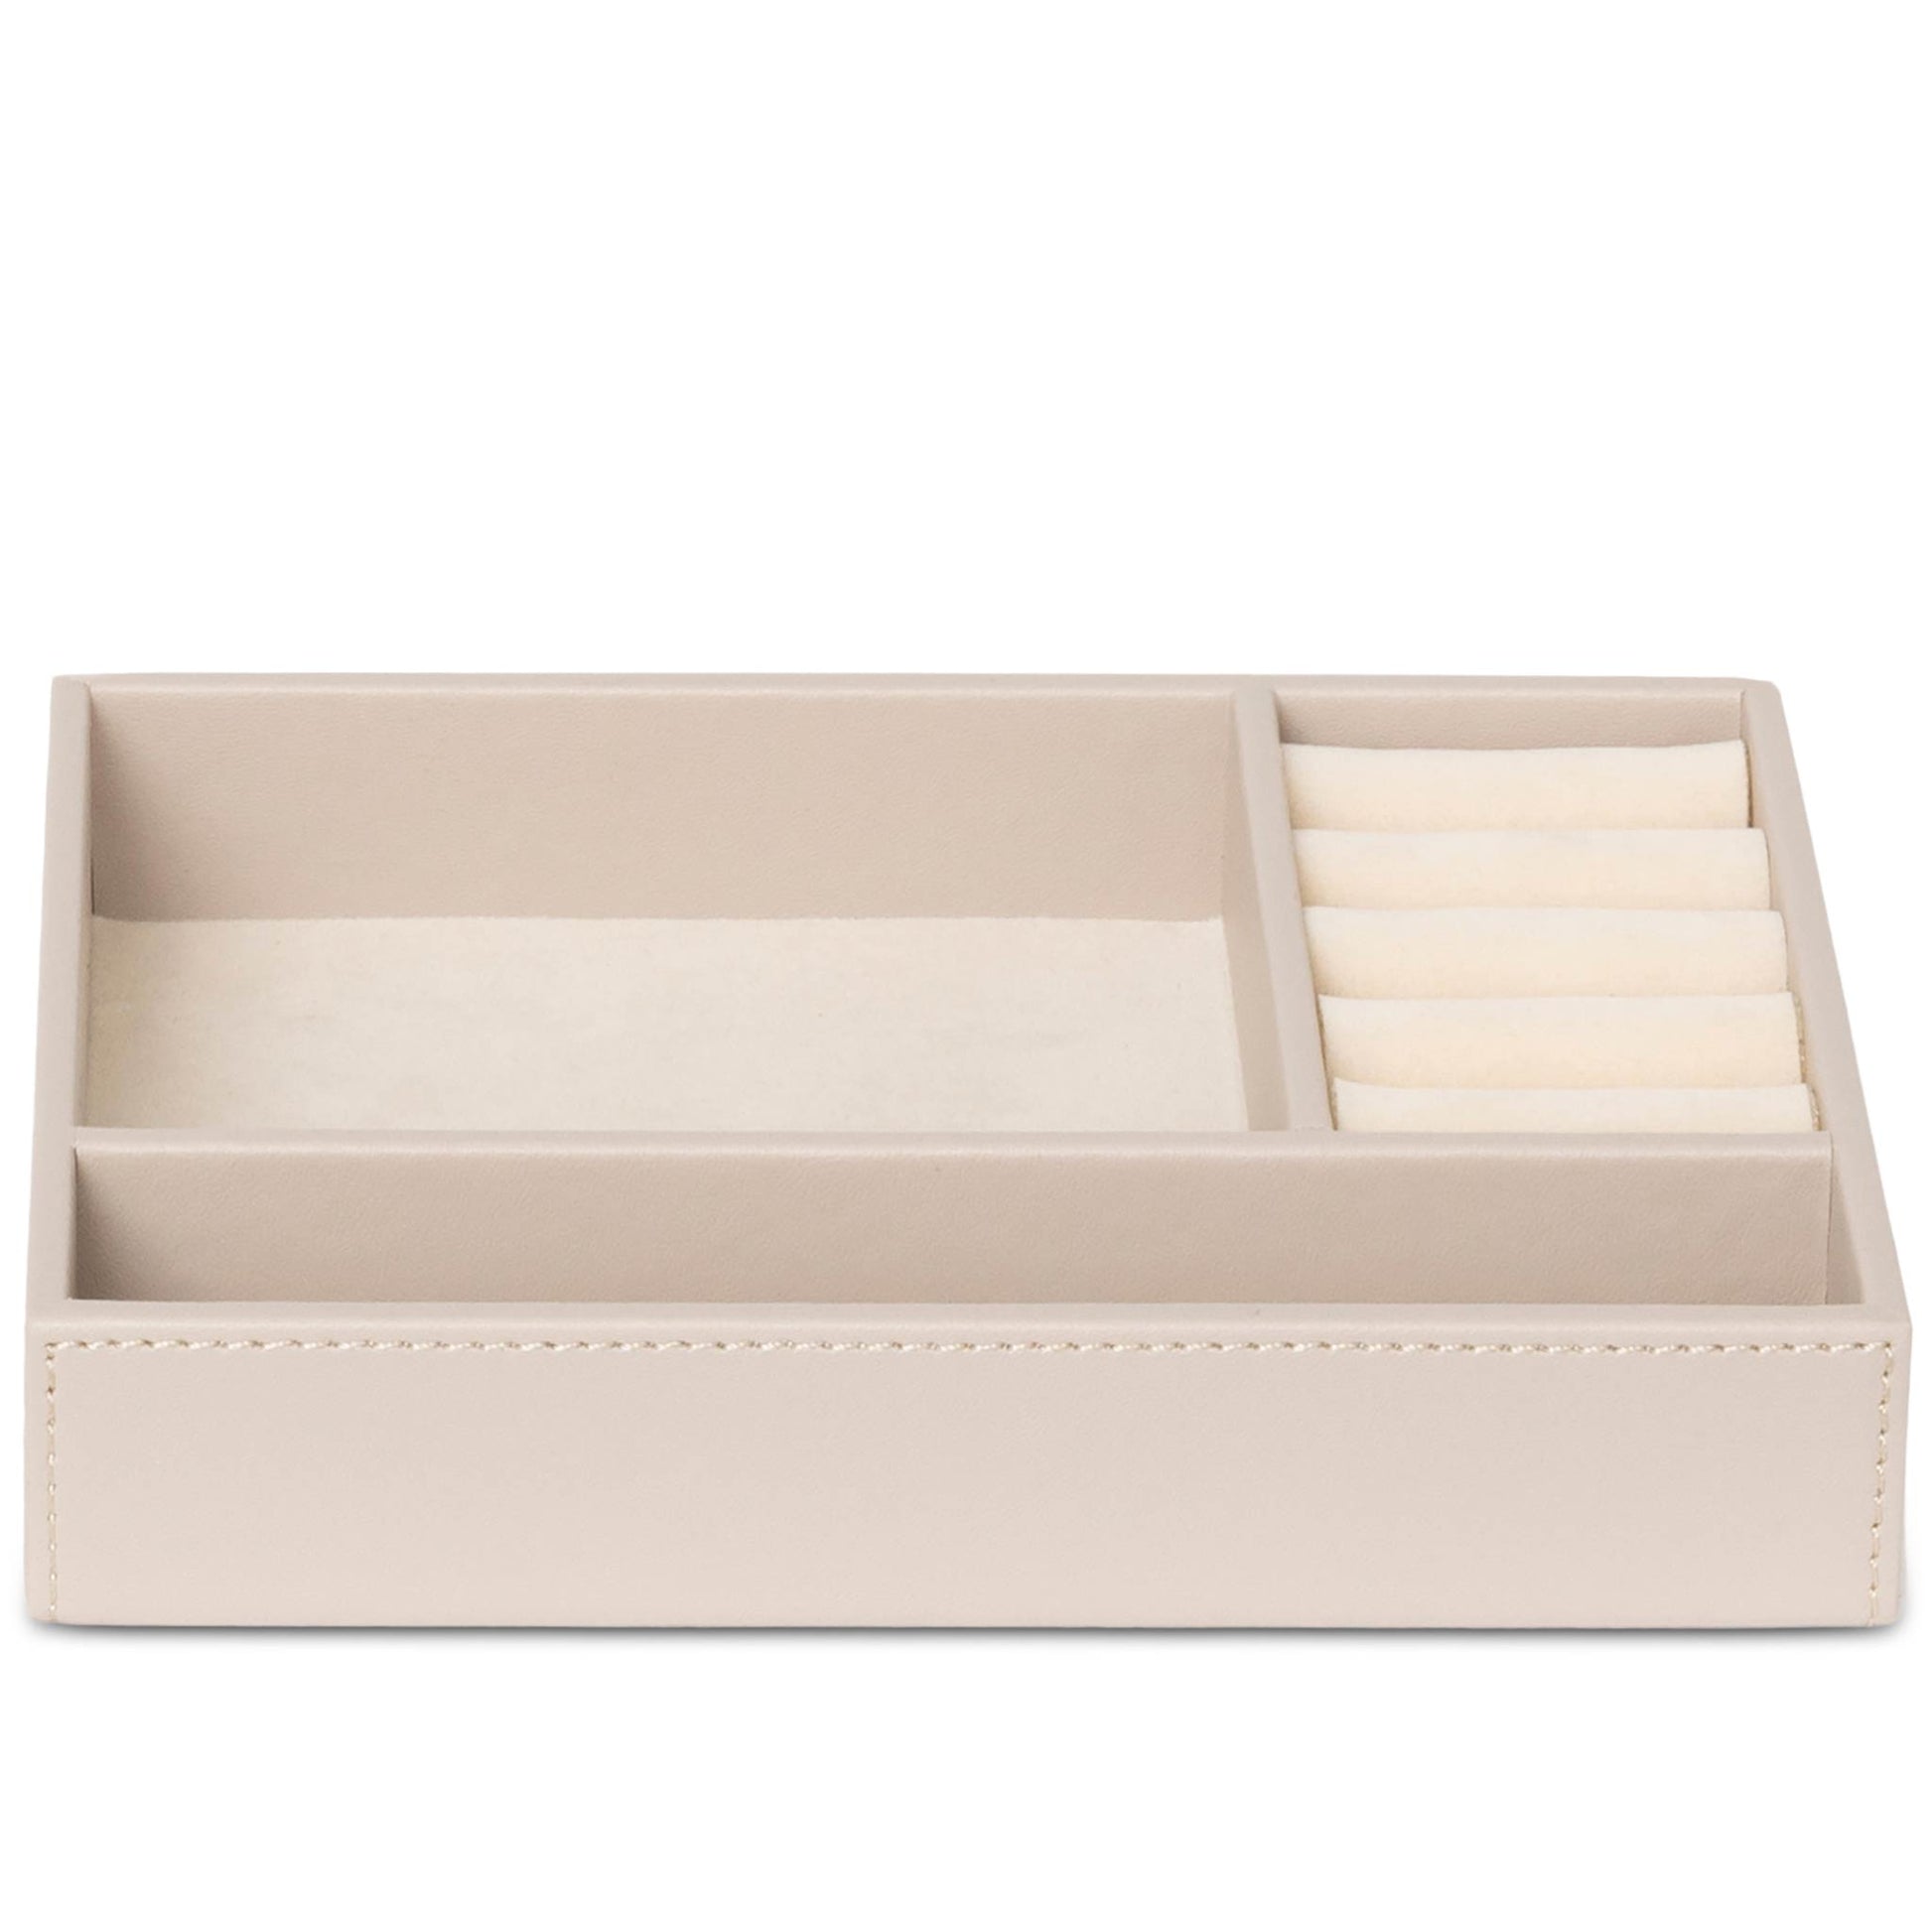 Bentley Andros natural leather jewellery tray with jewellery cushions